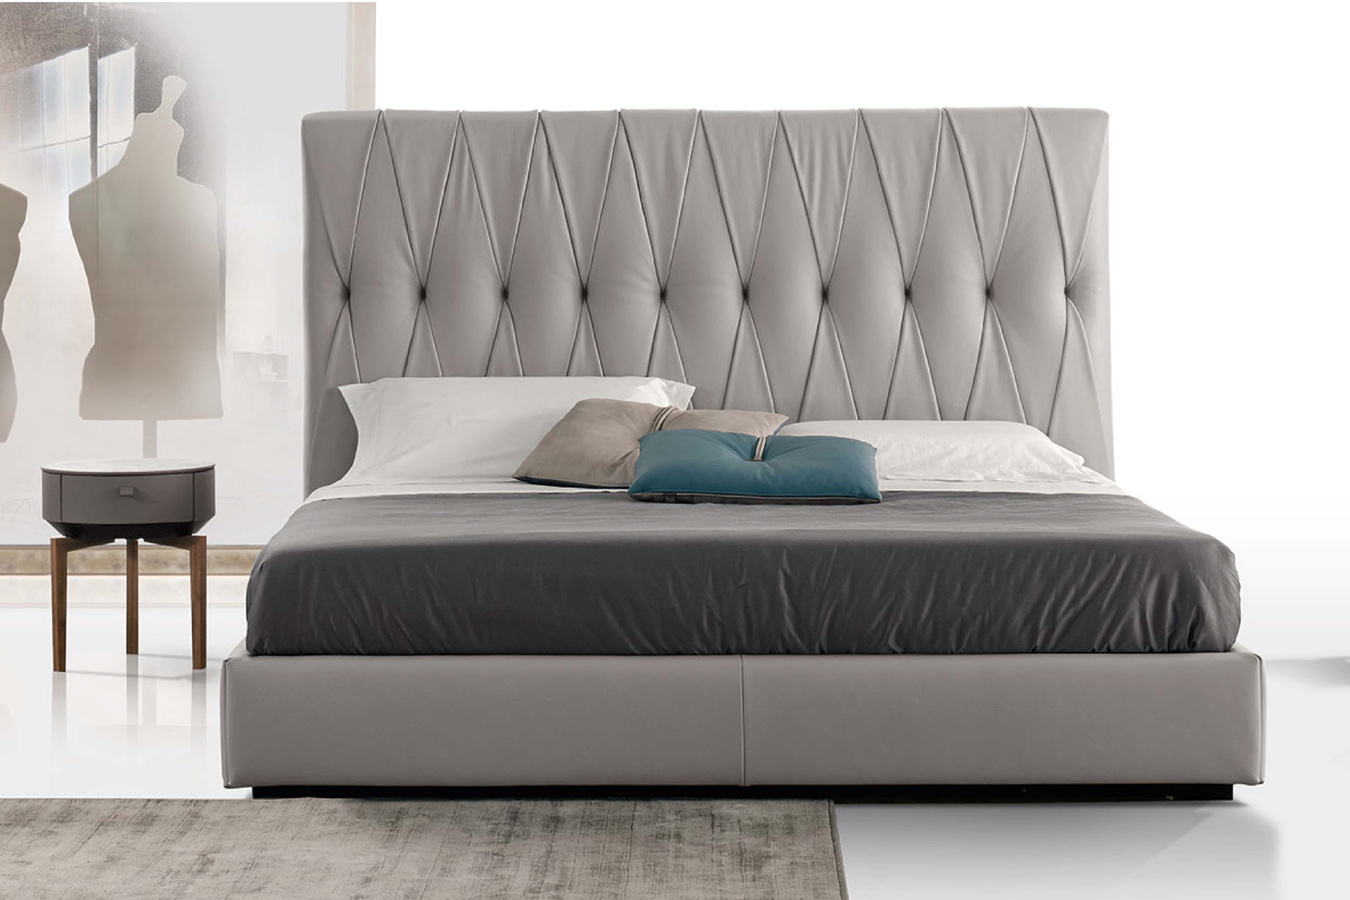 Gamma DHC Beds Marlon Night 01 hover